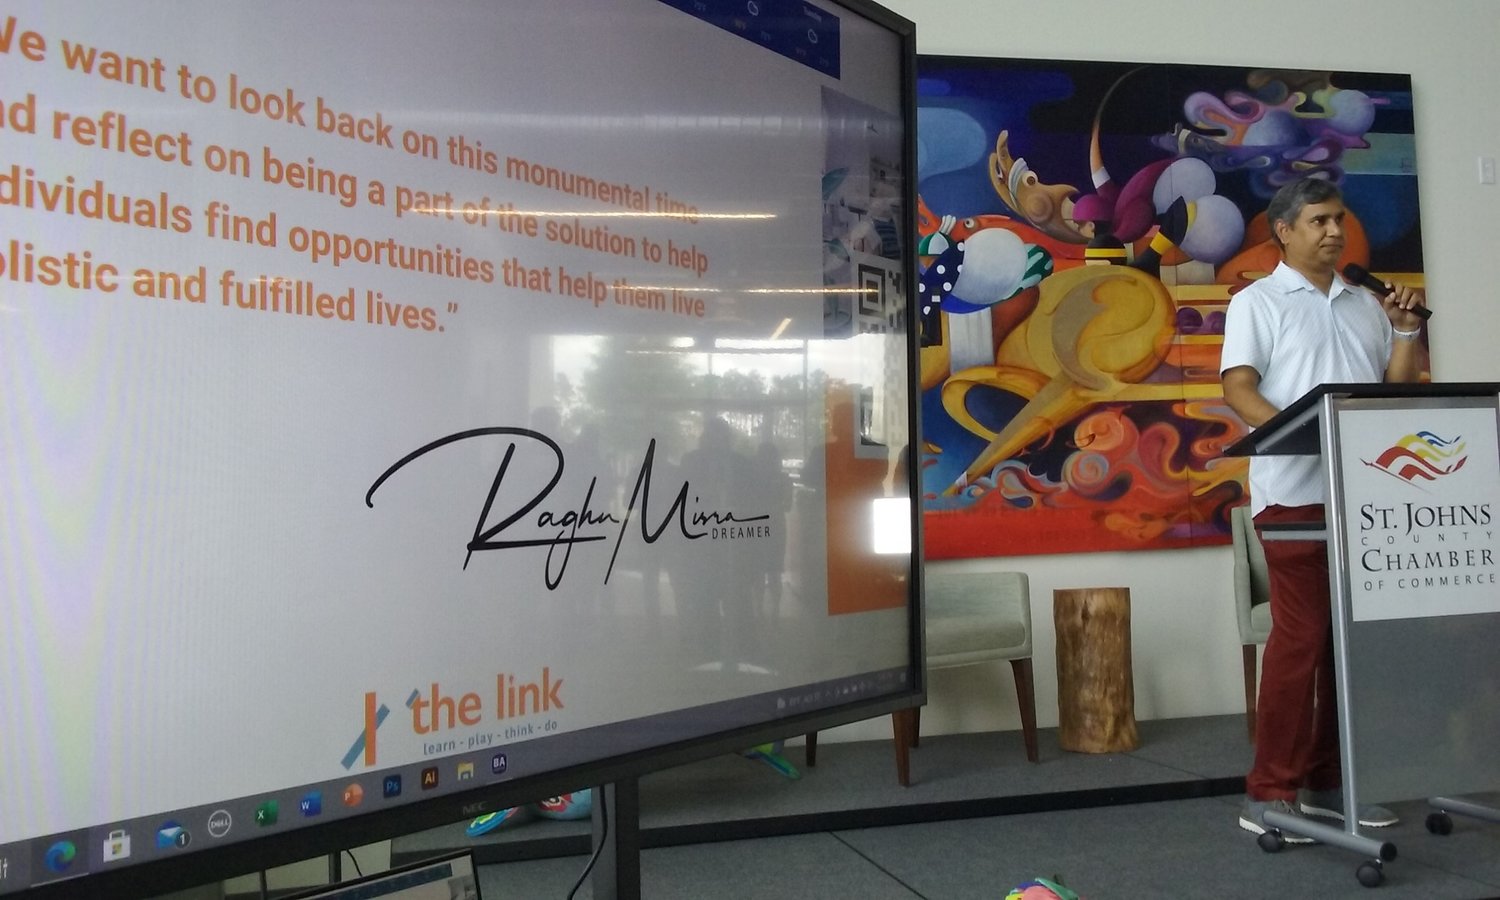 Entrepreneur Raghu Misra speaks during grand opening festivities for the link on Wednesday, July 14. The screen to the left displays a quote from Misra.